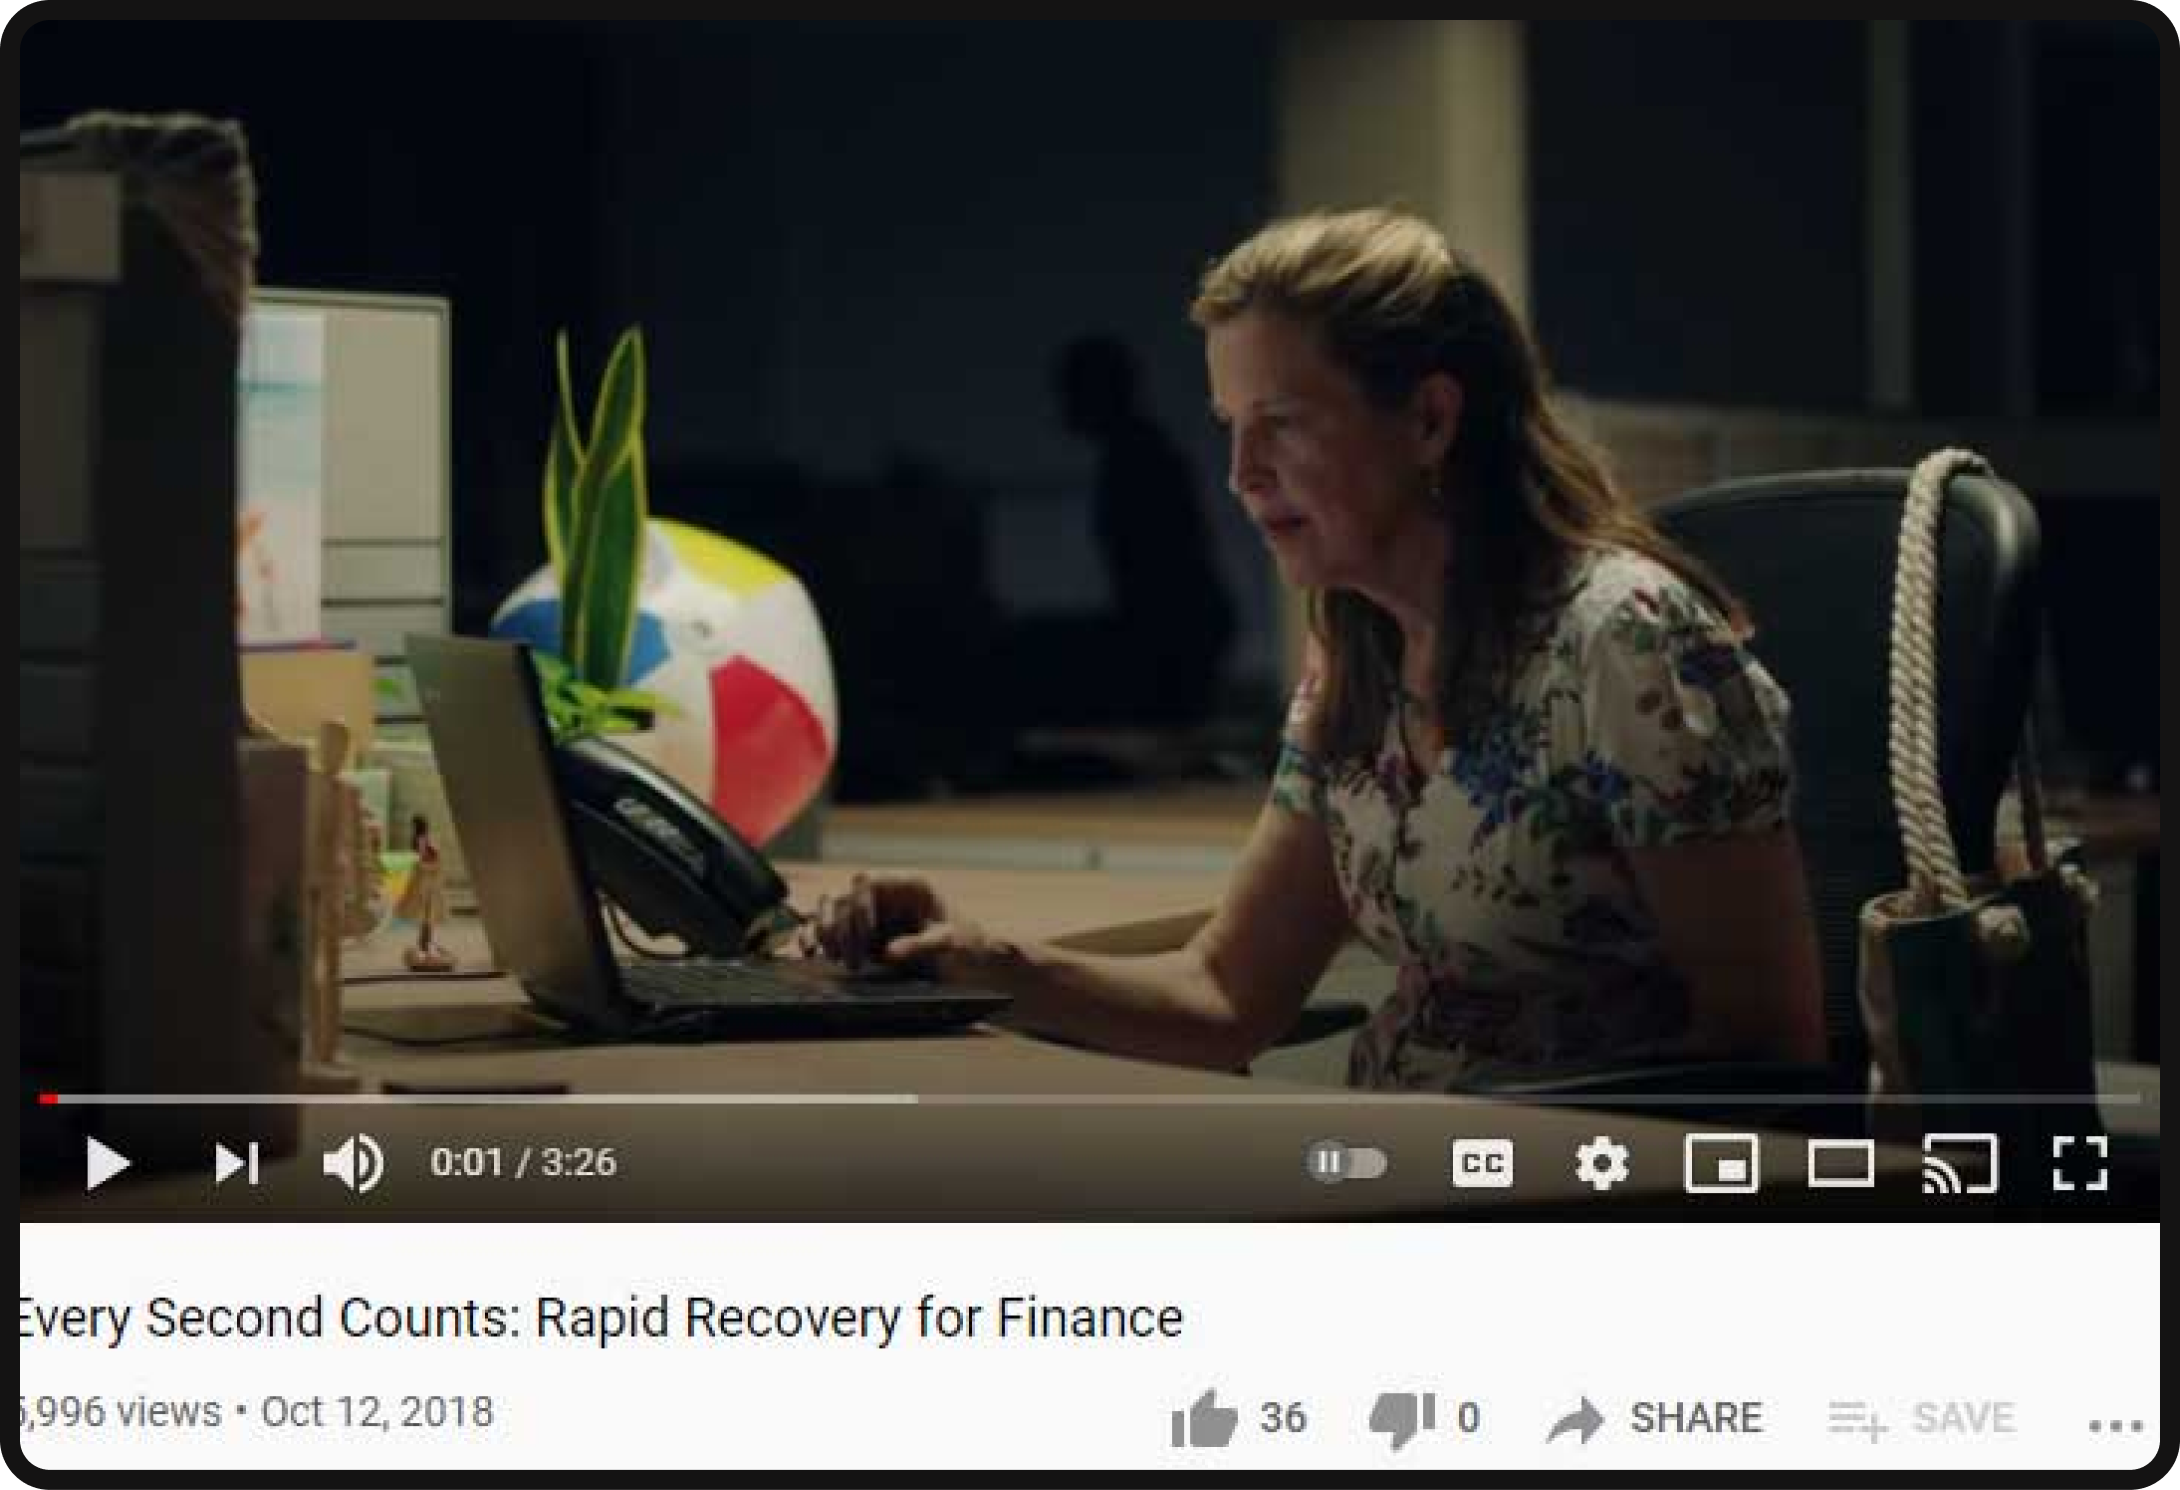 IBM's "Every Second Counts" Campaign